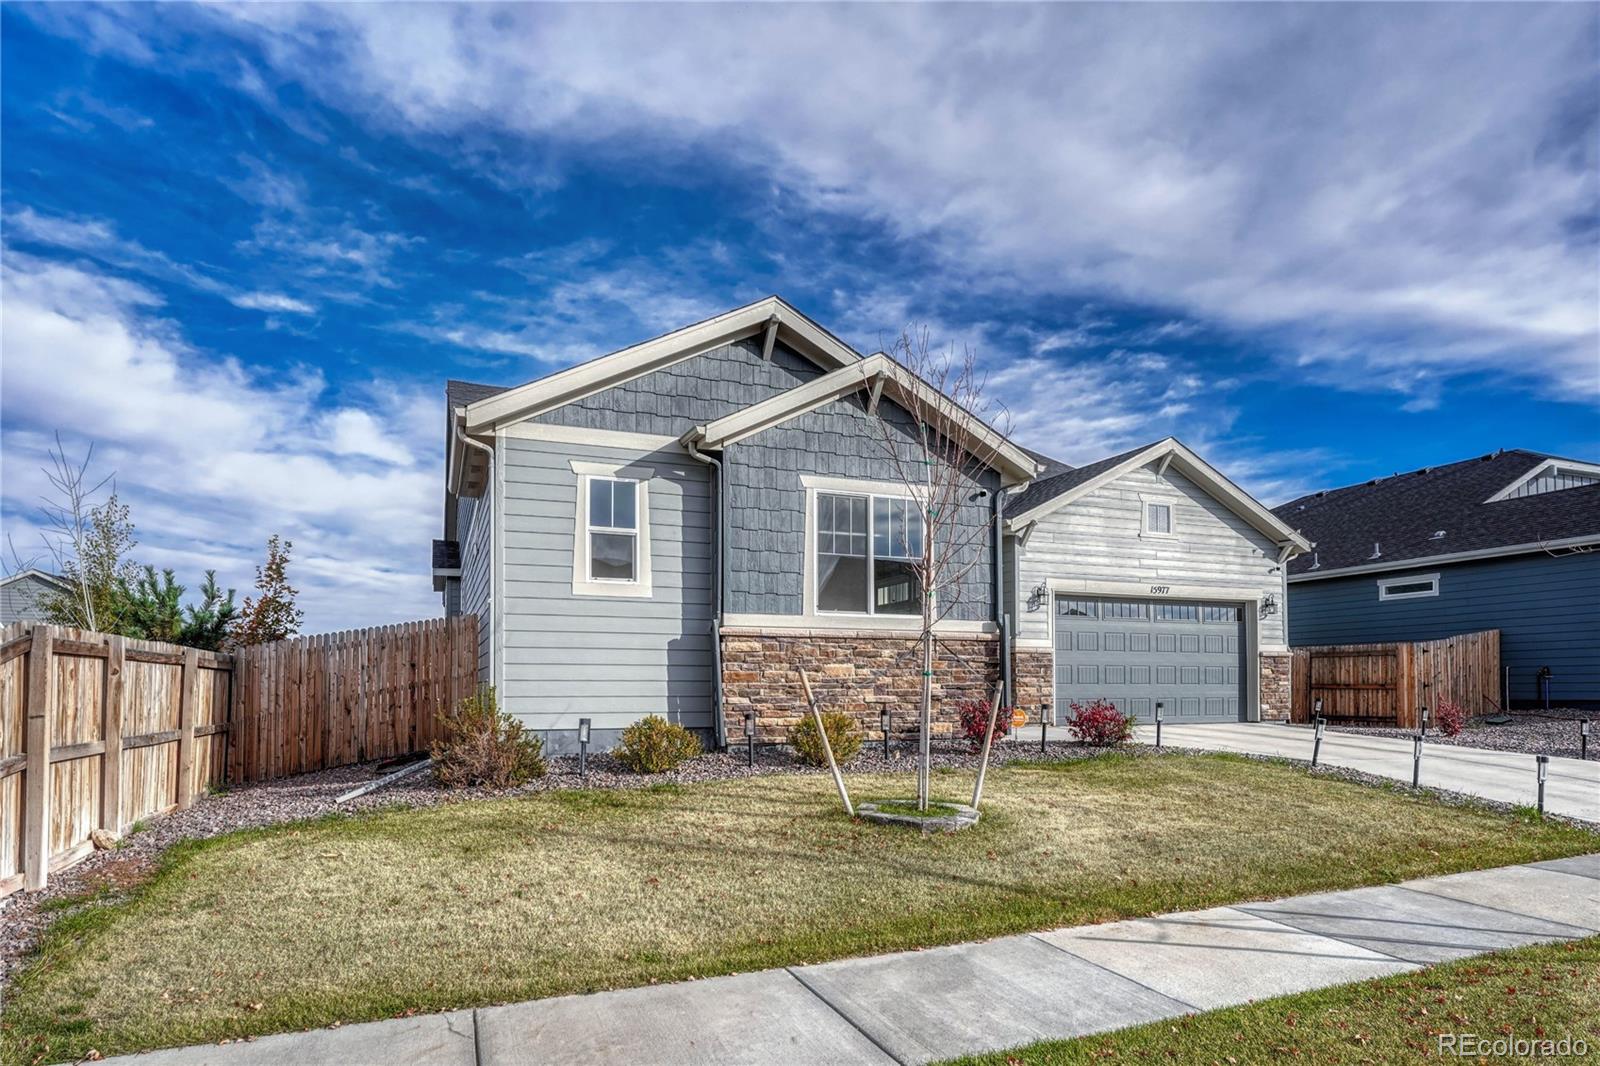 Report Image for 15977 E 115th Place,Commerce City, Colorado